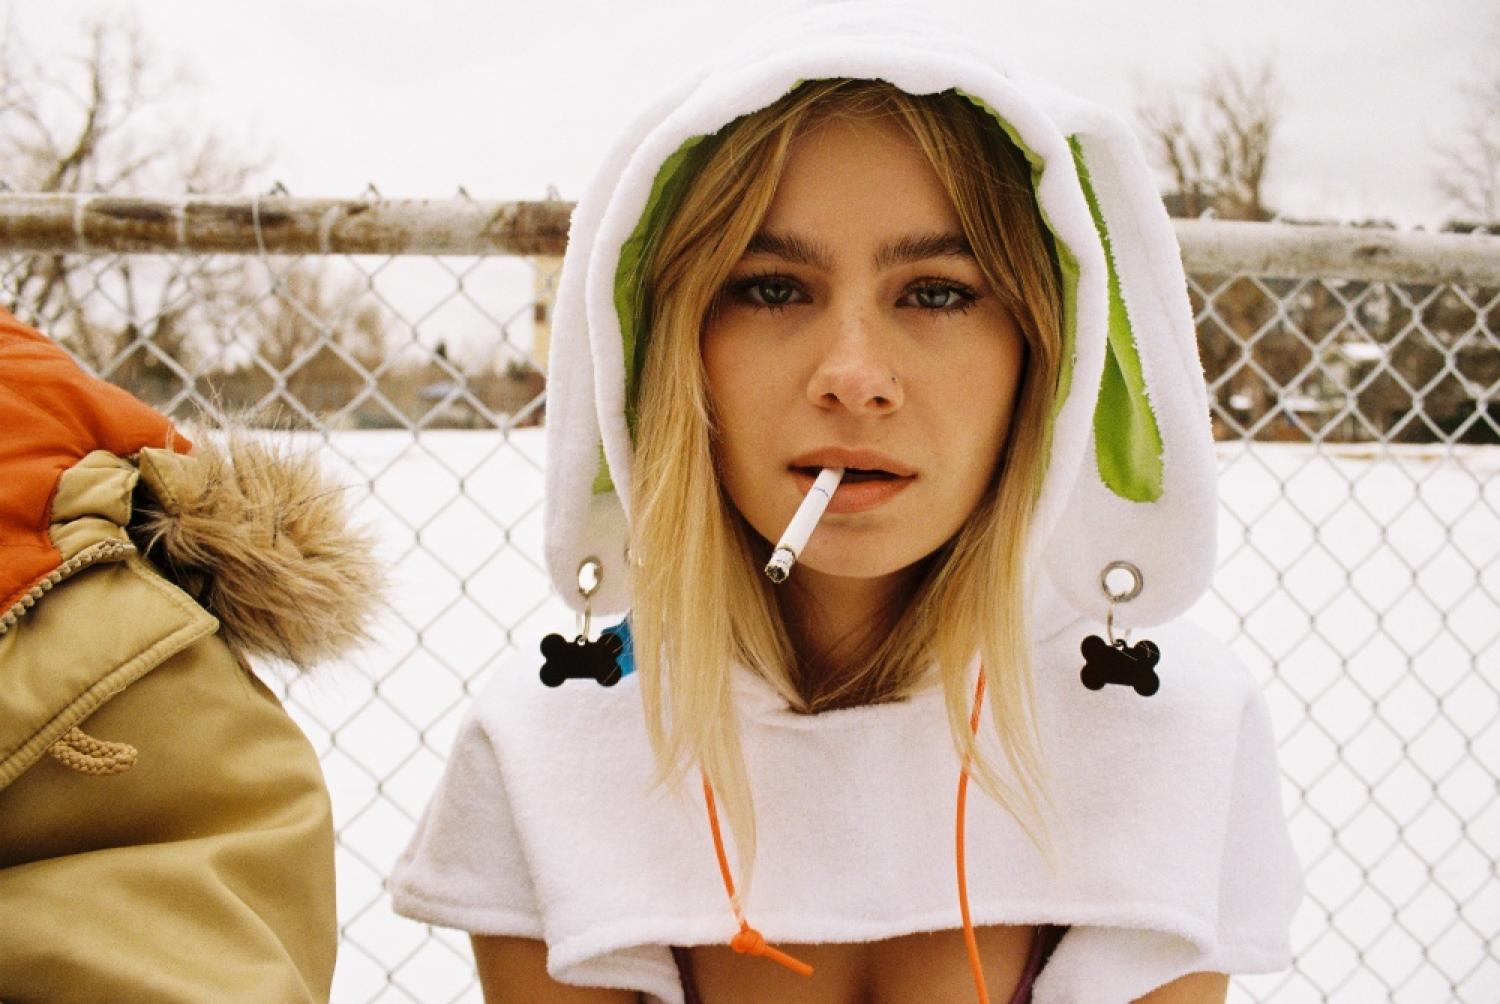 cigarette and Bunny hat